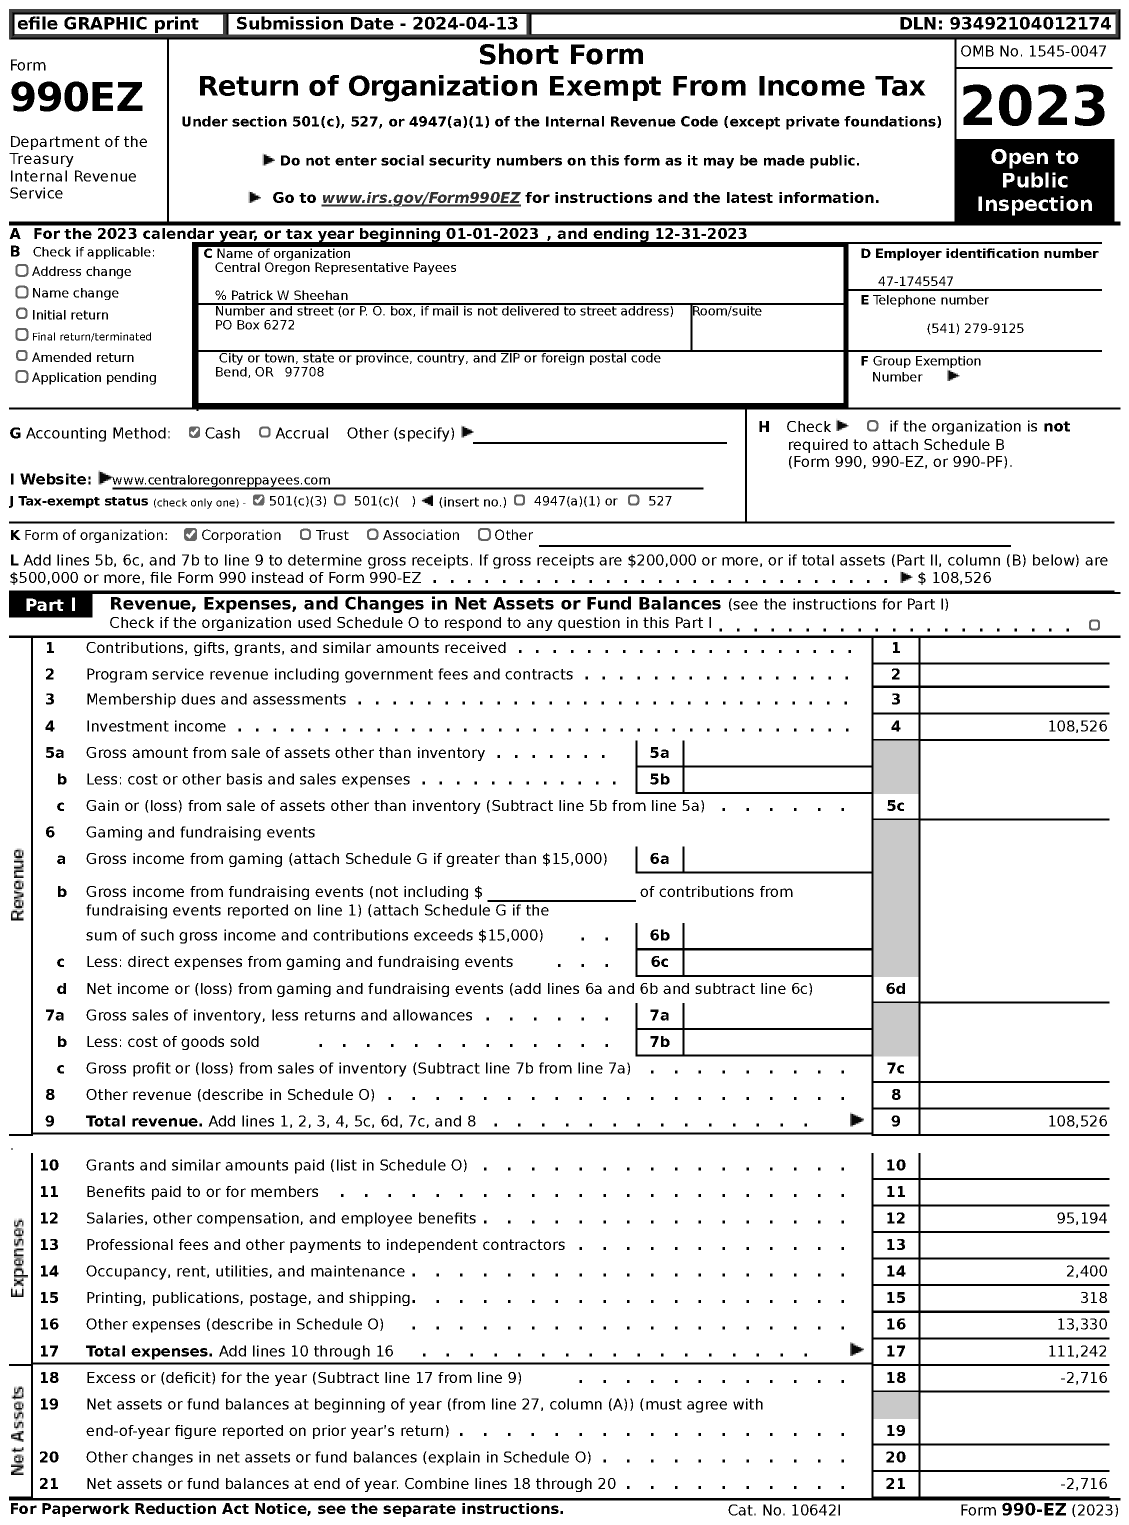 Image of first page of 2023 Form 990EZ for Central Oregon Representative Payees